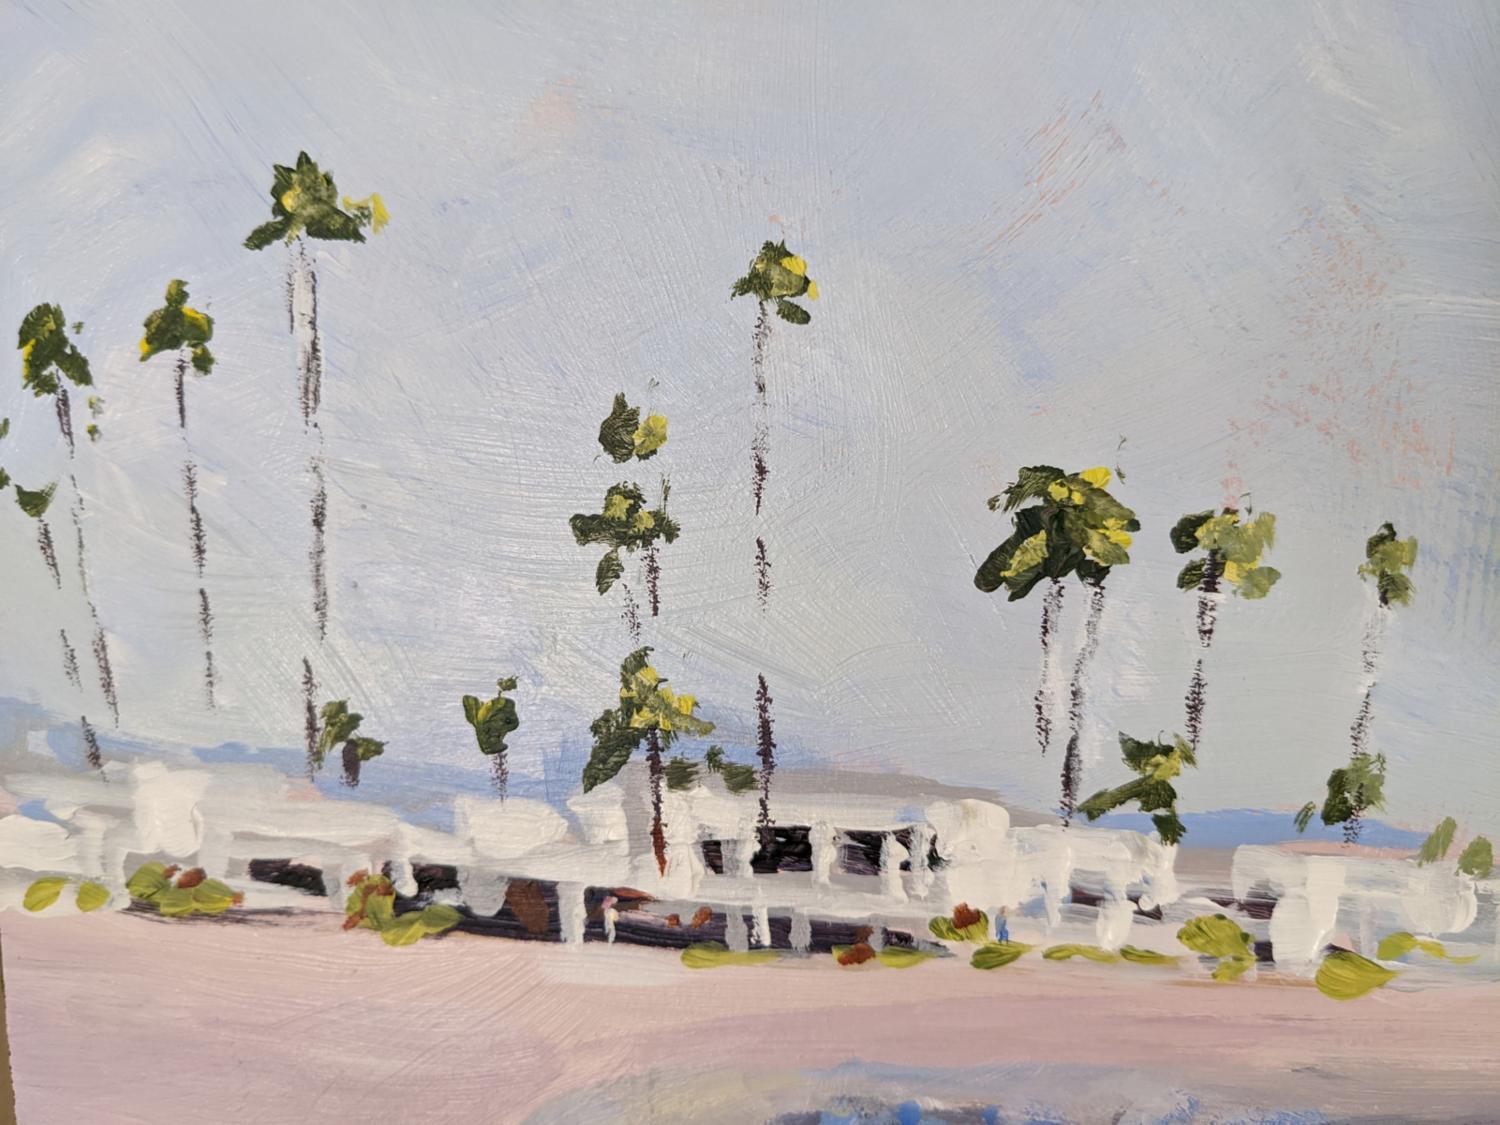 Ensenada, Mexico on a Beautiful Hot Summer Day, Original Painting - Abstract Impressionist Art by Samuel Pretorius